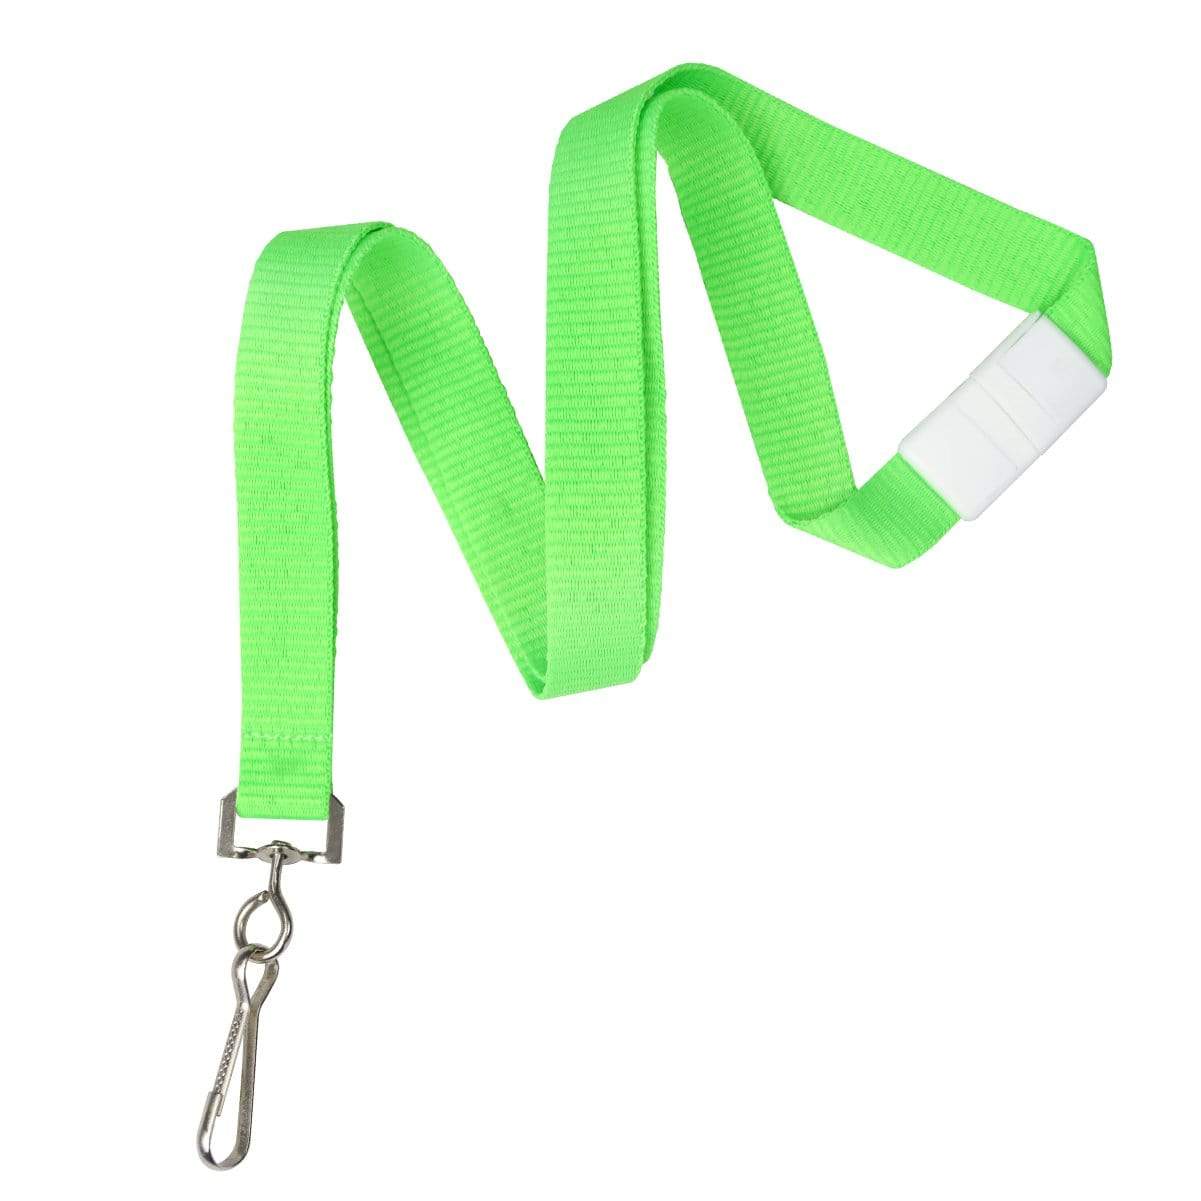 Neon Green Neon Lanyard with Safety Breakaway Clasp - Bright Soft Lanyards 2138-504X 2138-5044